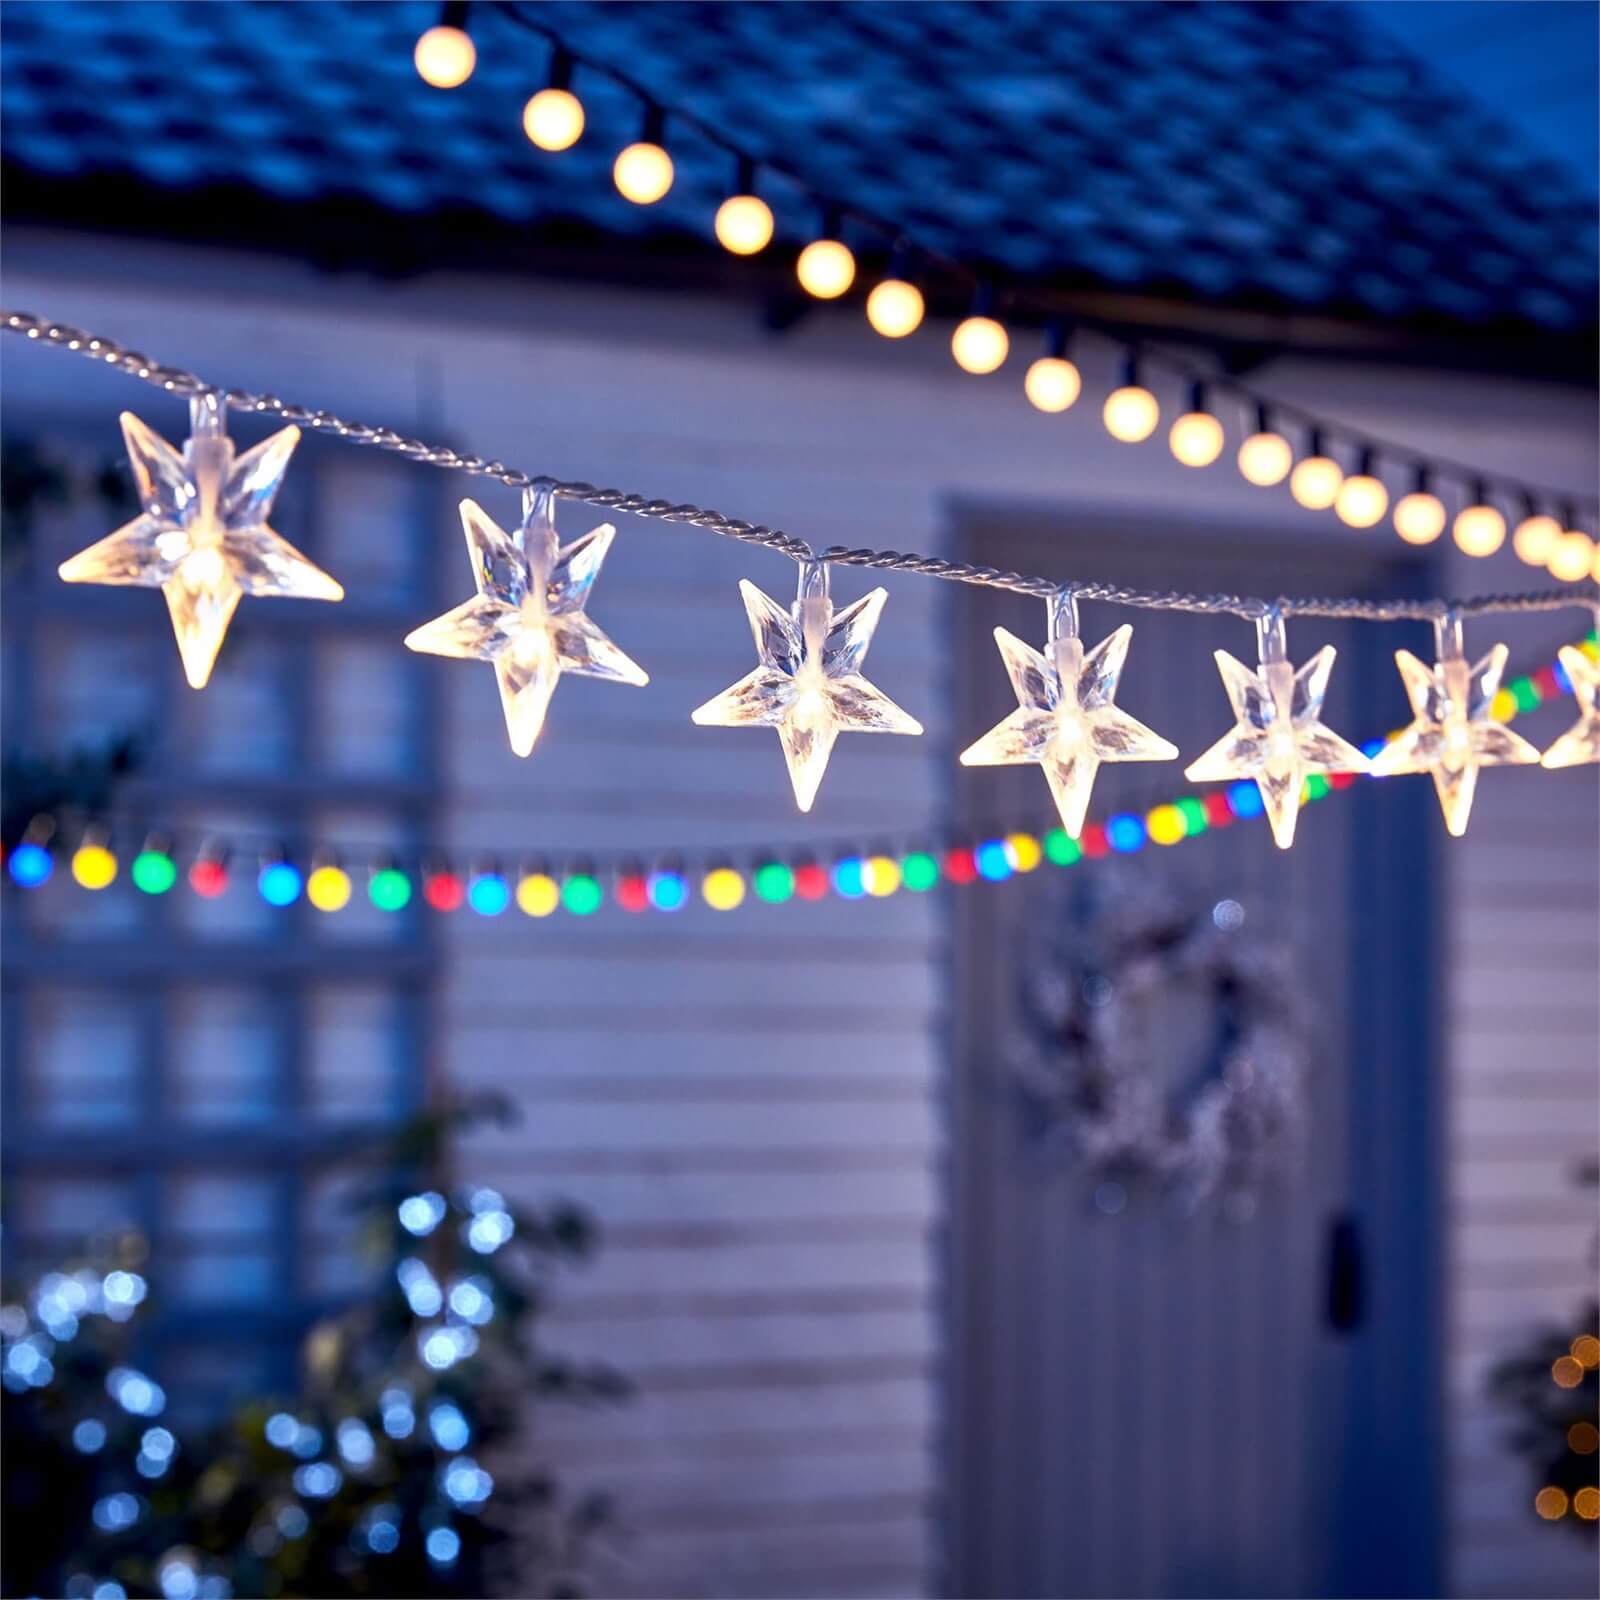 100 Star Party Lights - Bright White